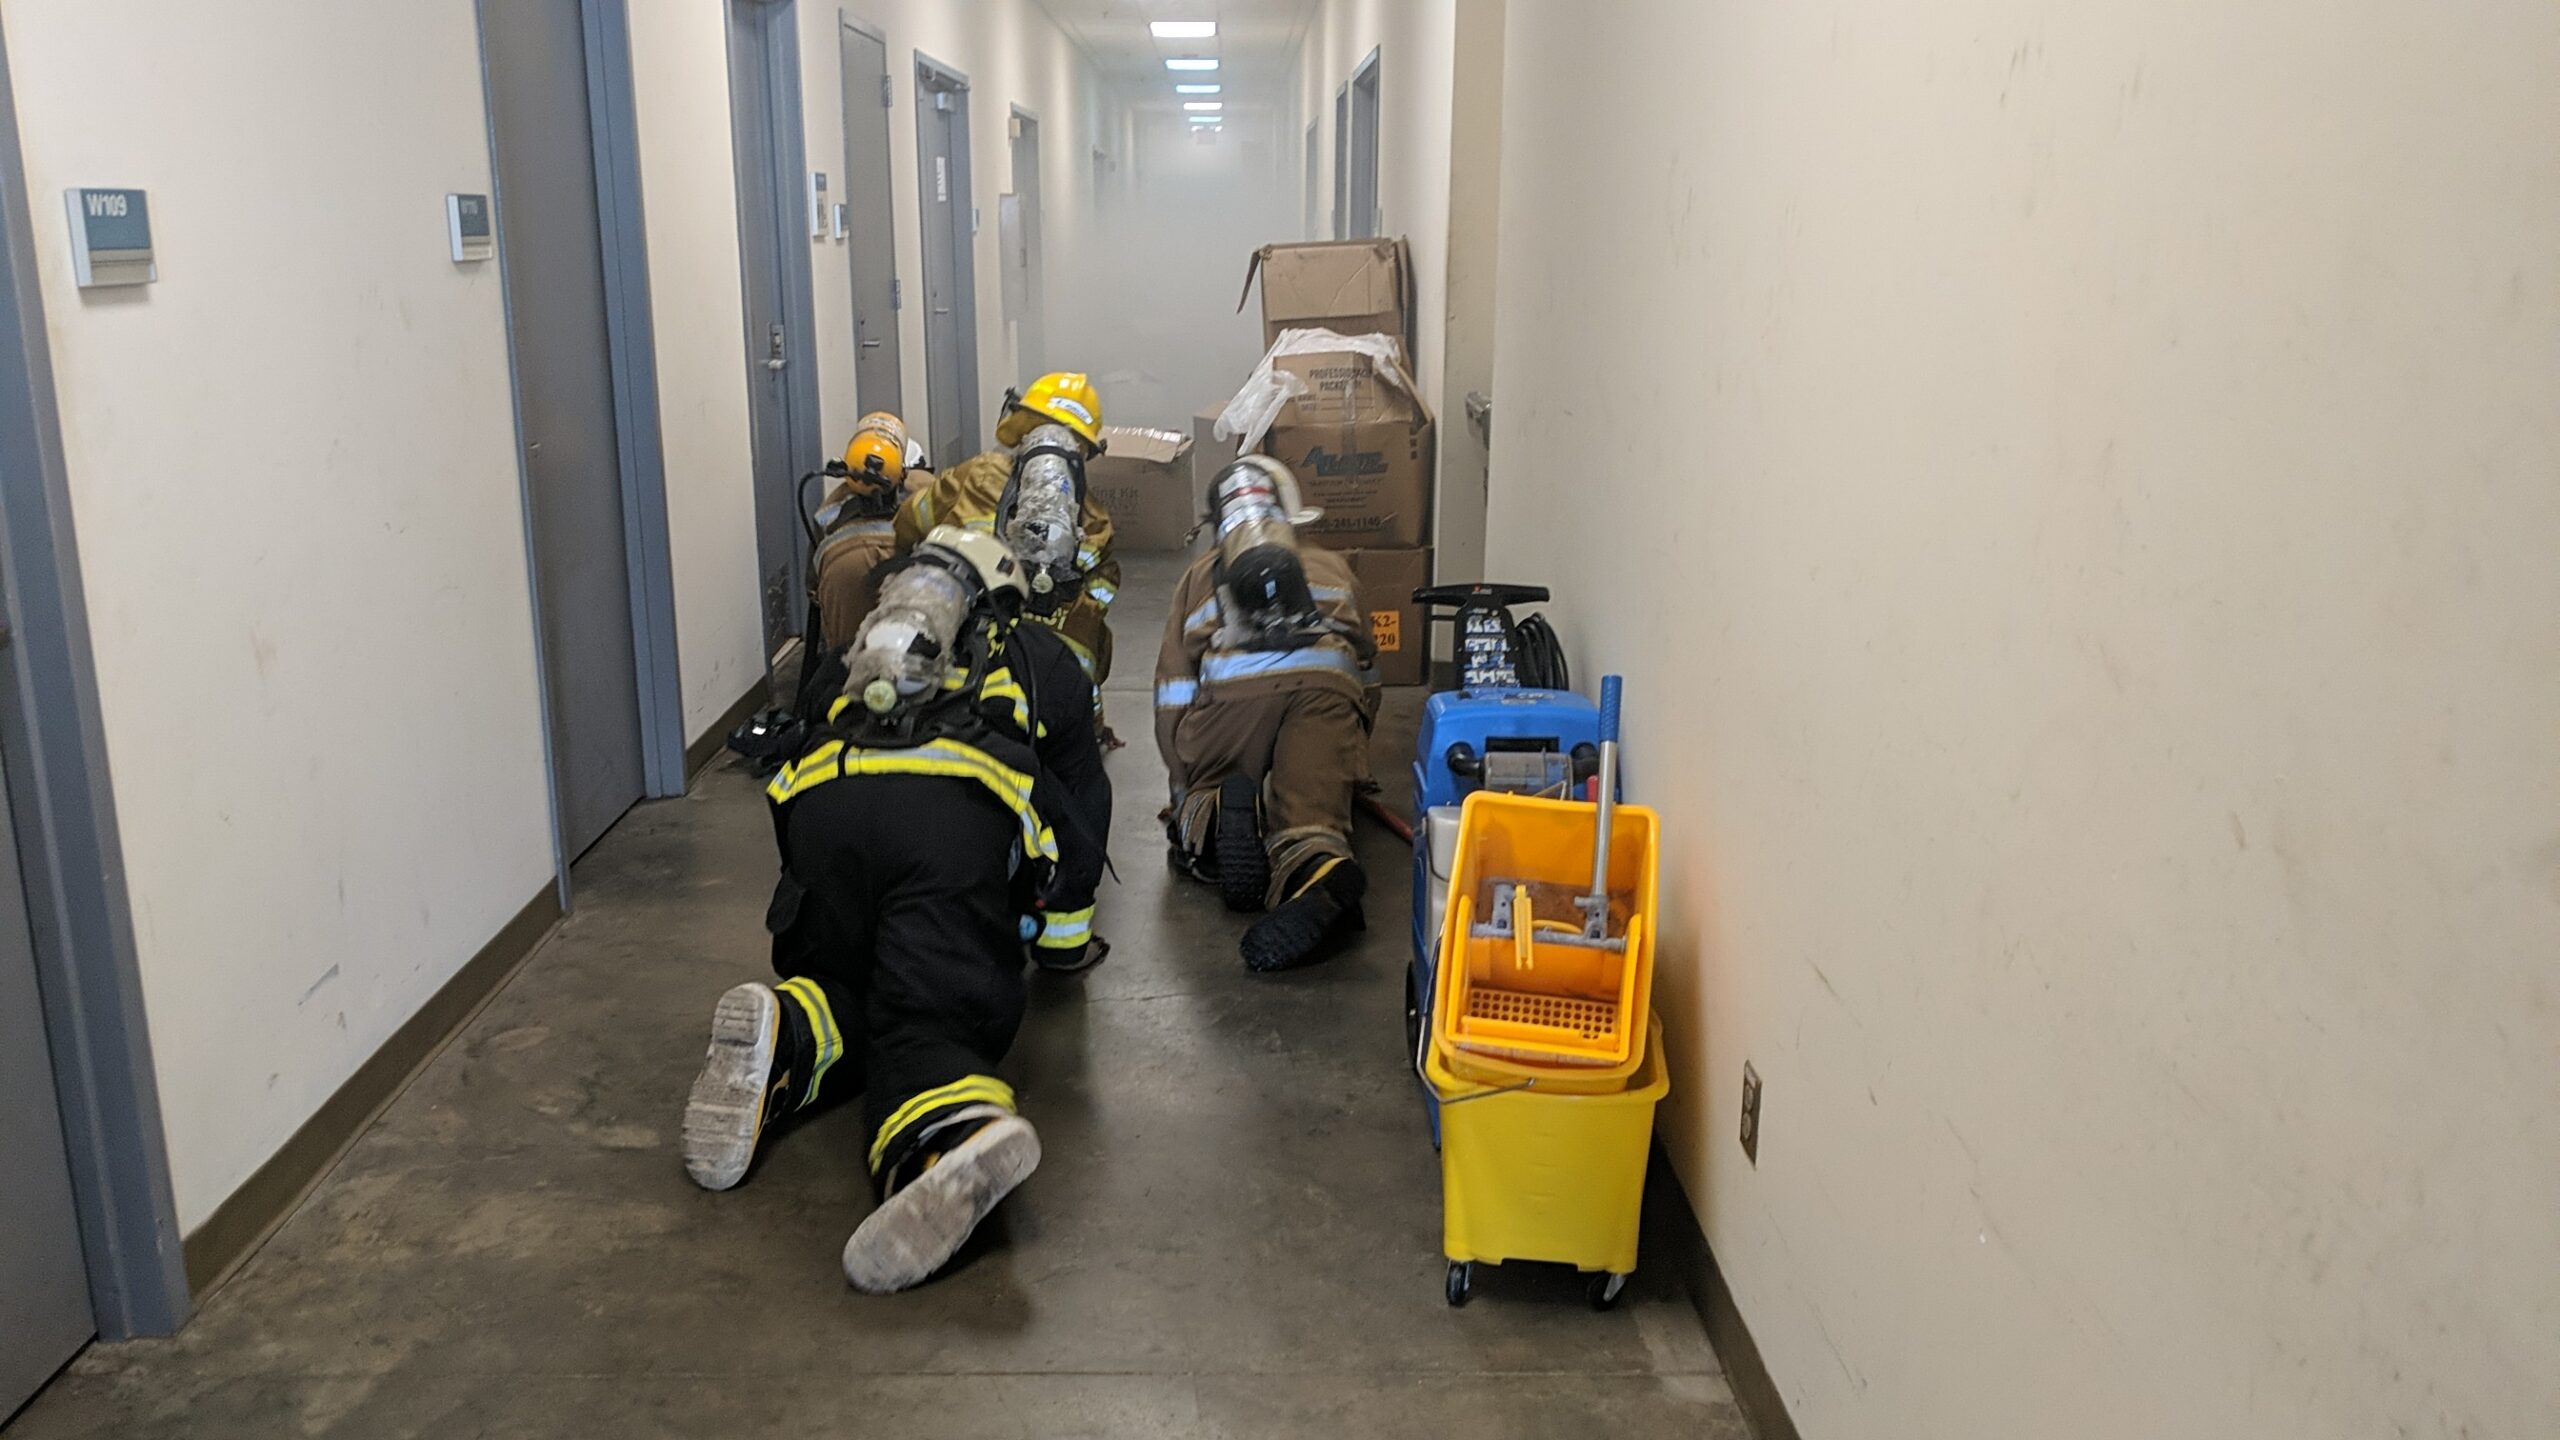 Members of the Liberia Fire Service crawl on the floor of a warehouse filled with artificial smoke to rescue two manikins placed there for them to locate and rescue, U.S. Embassy compound, Monrovia, Liberia, March 2021. (U.S. Department of State photo)